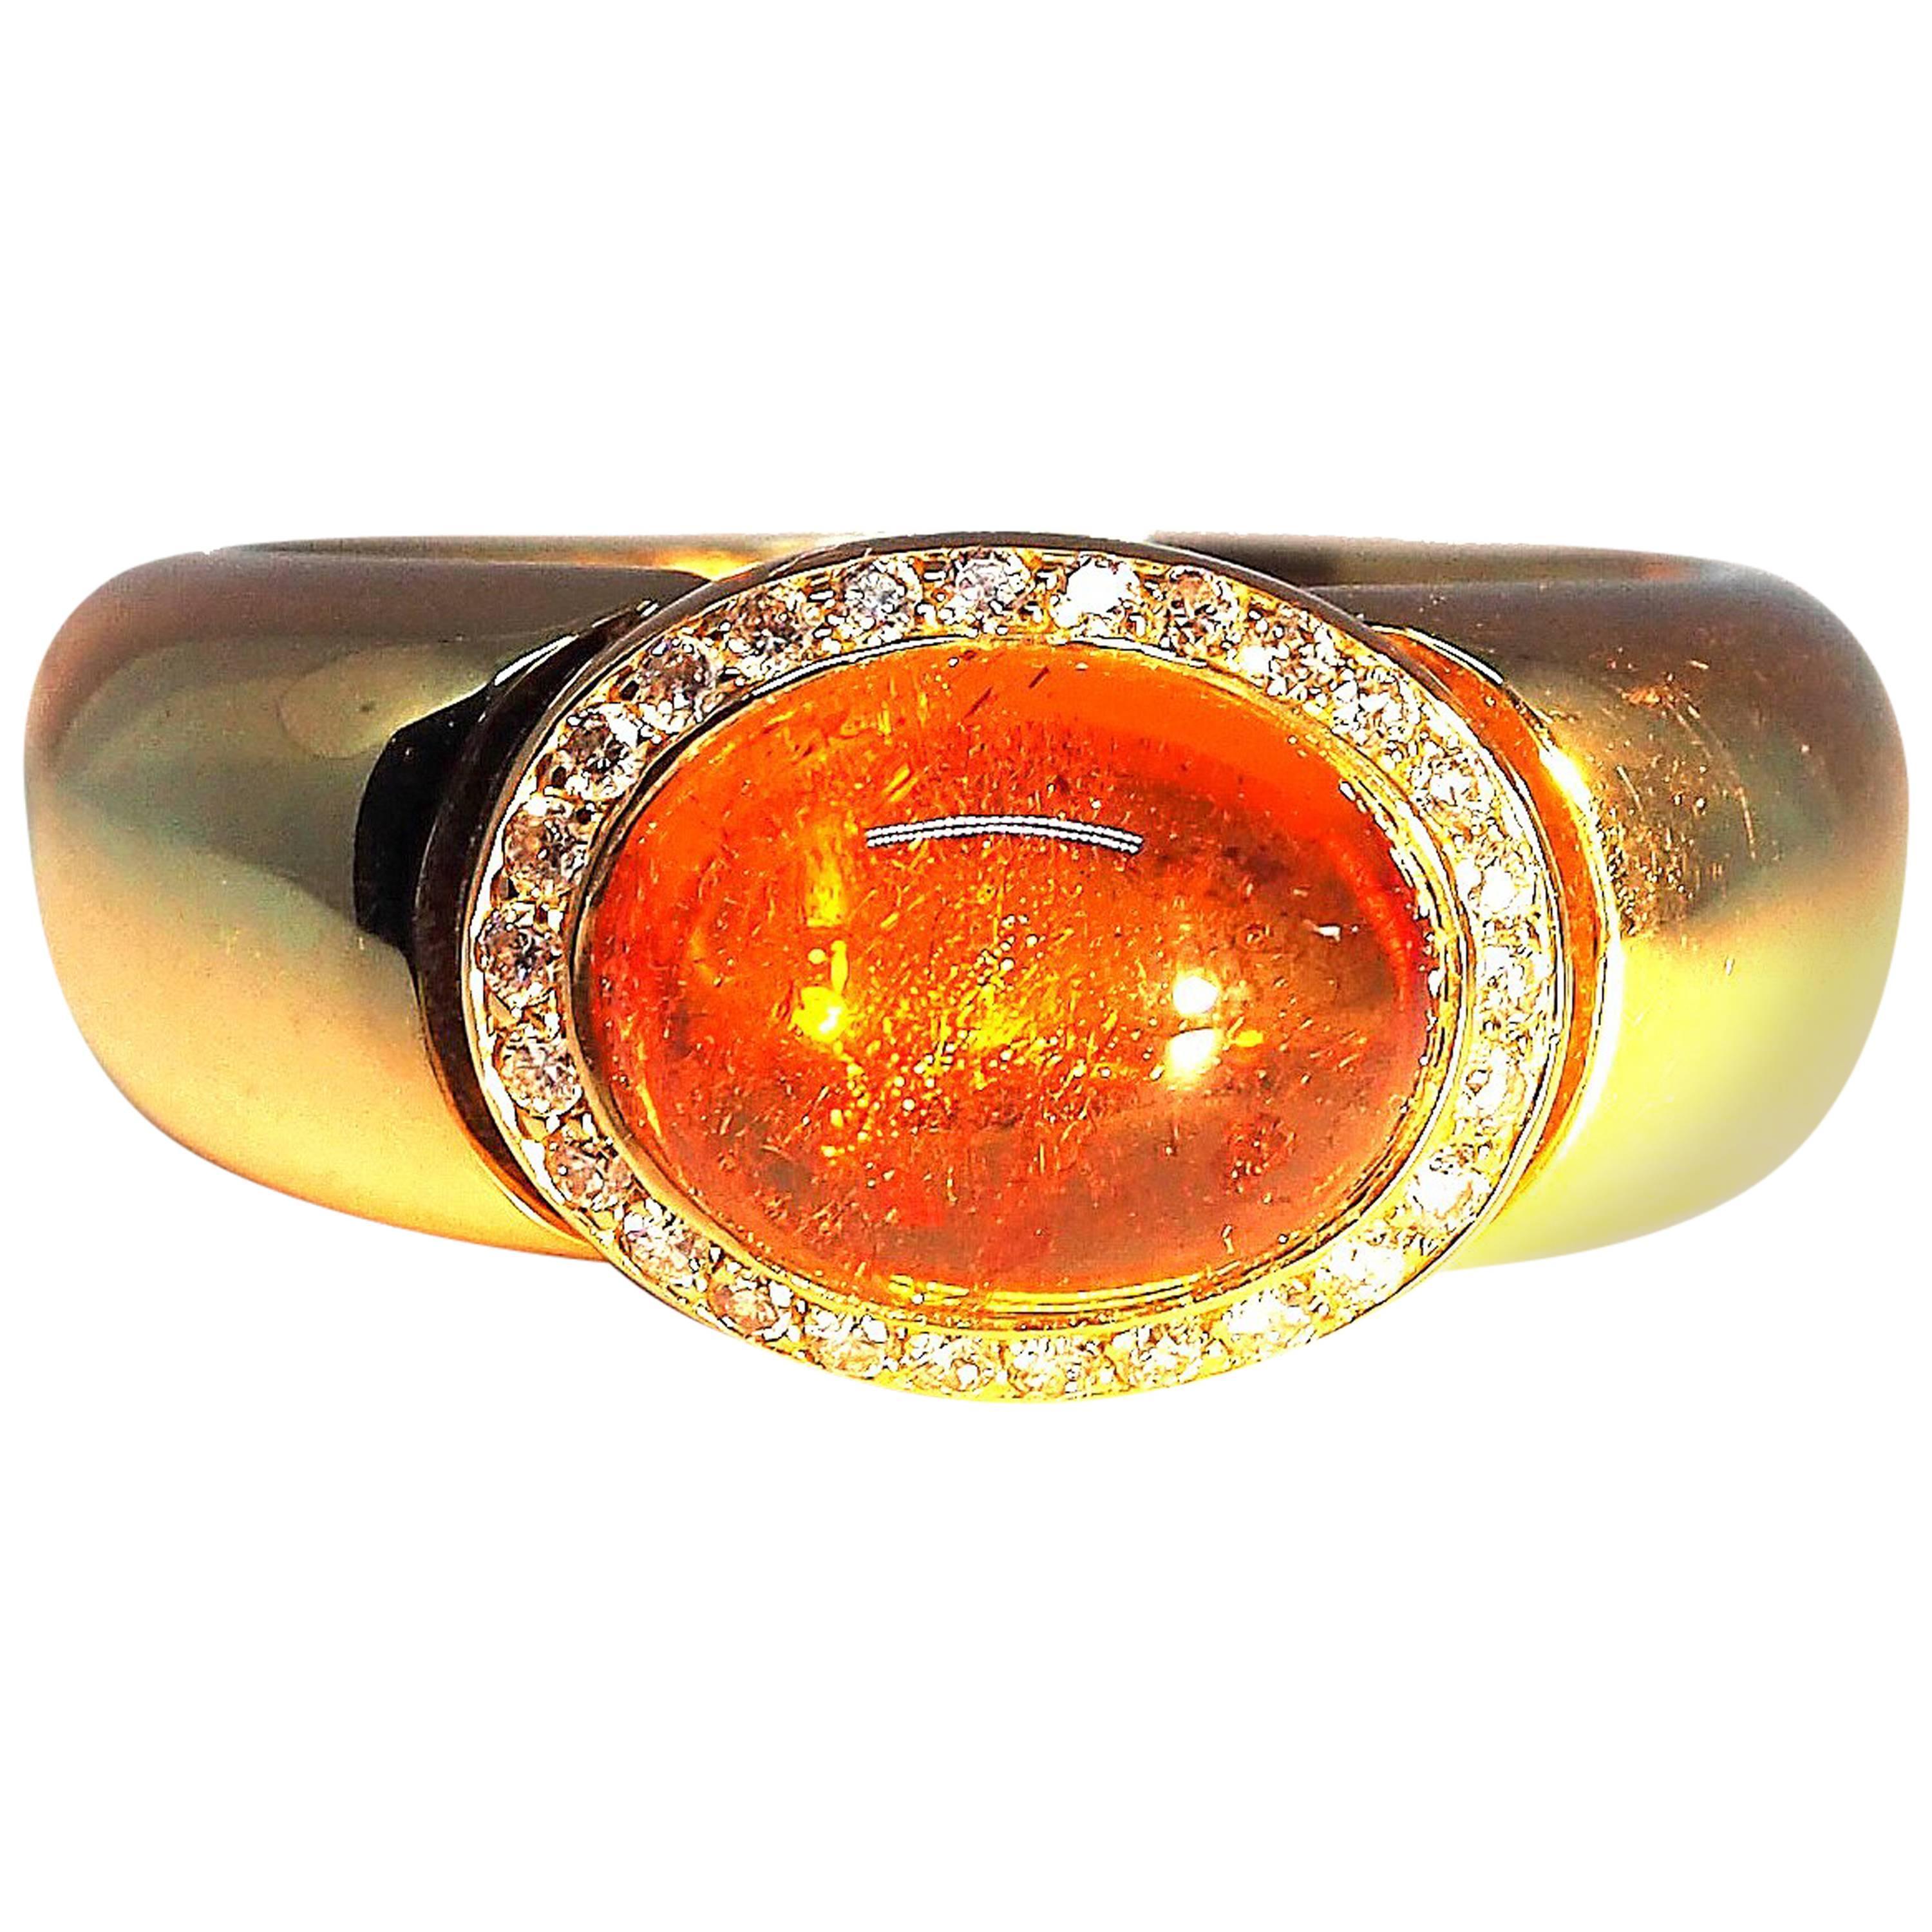 Thomas Leyser is renowned for his contemporary jewellery designs utilizing fine coloured gemstones and diamonds. 

This ring in 18k rose gold is set with a top quality Mandarine Garnet Cabouchon in an oval cut, 10x8mm - 4.21cts. and 26 diamonds